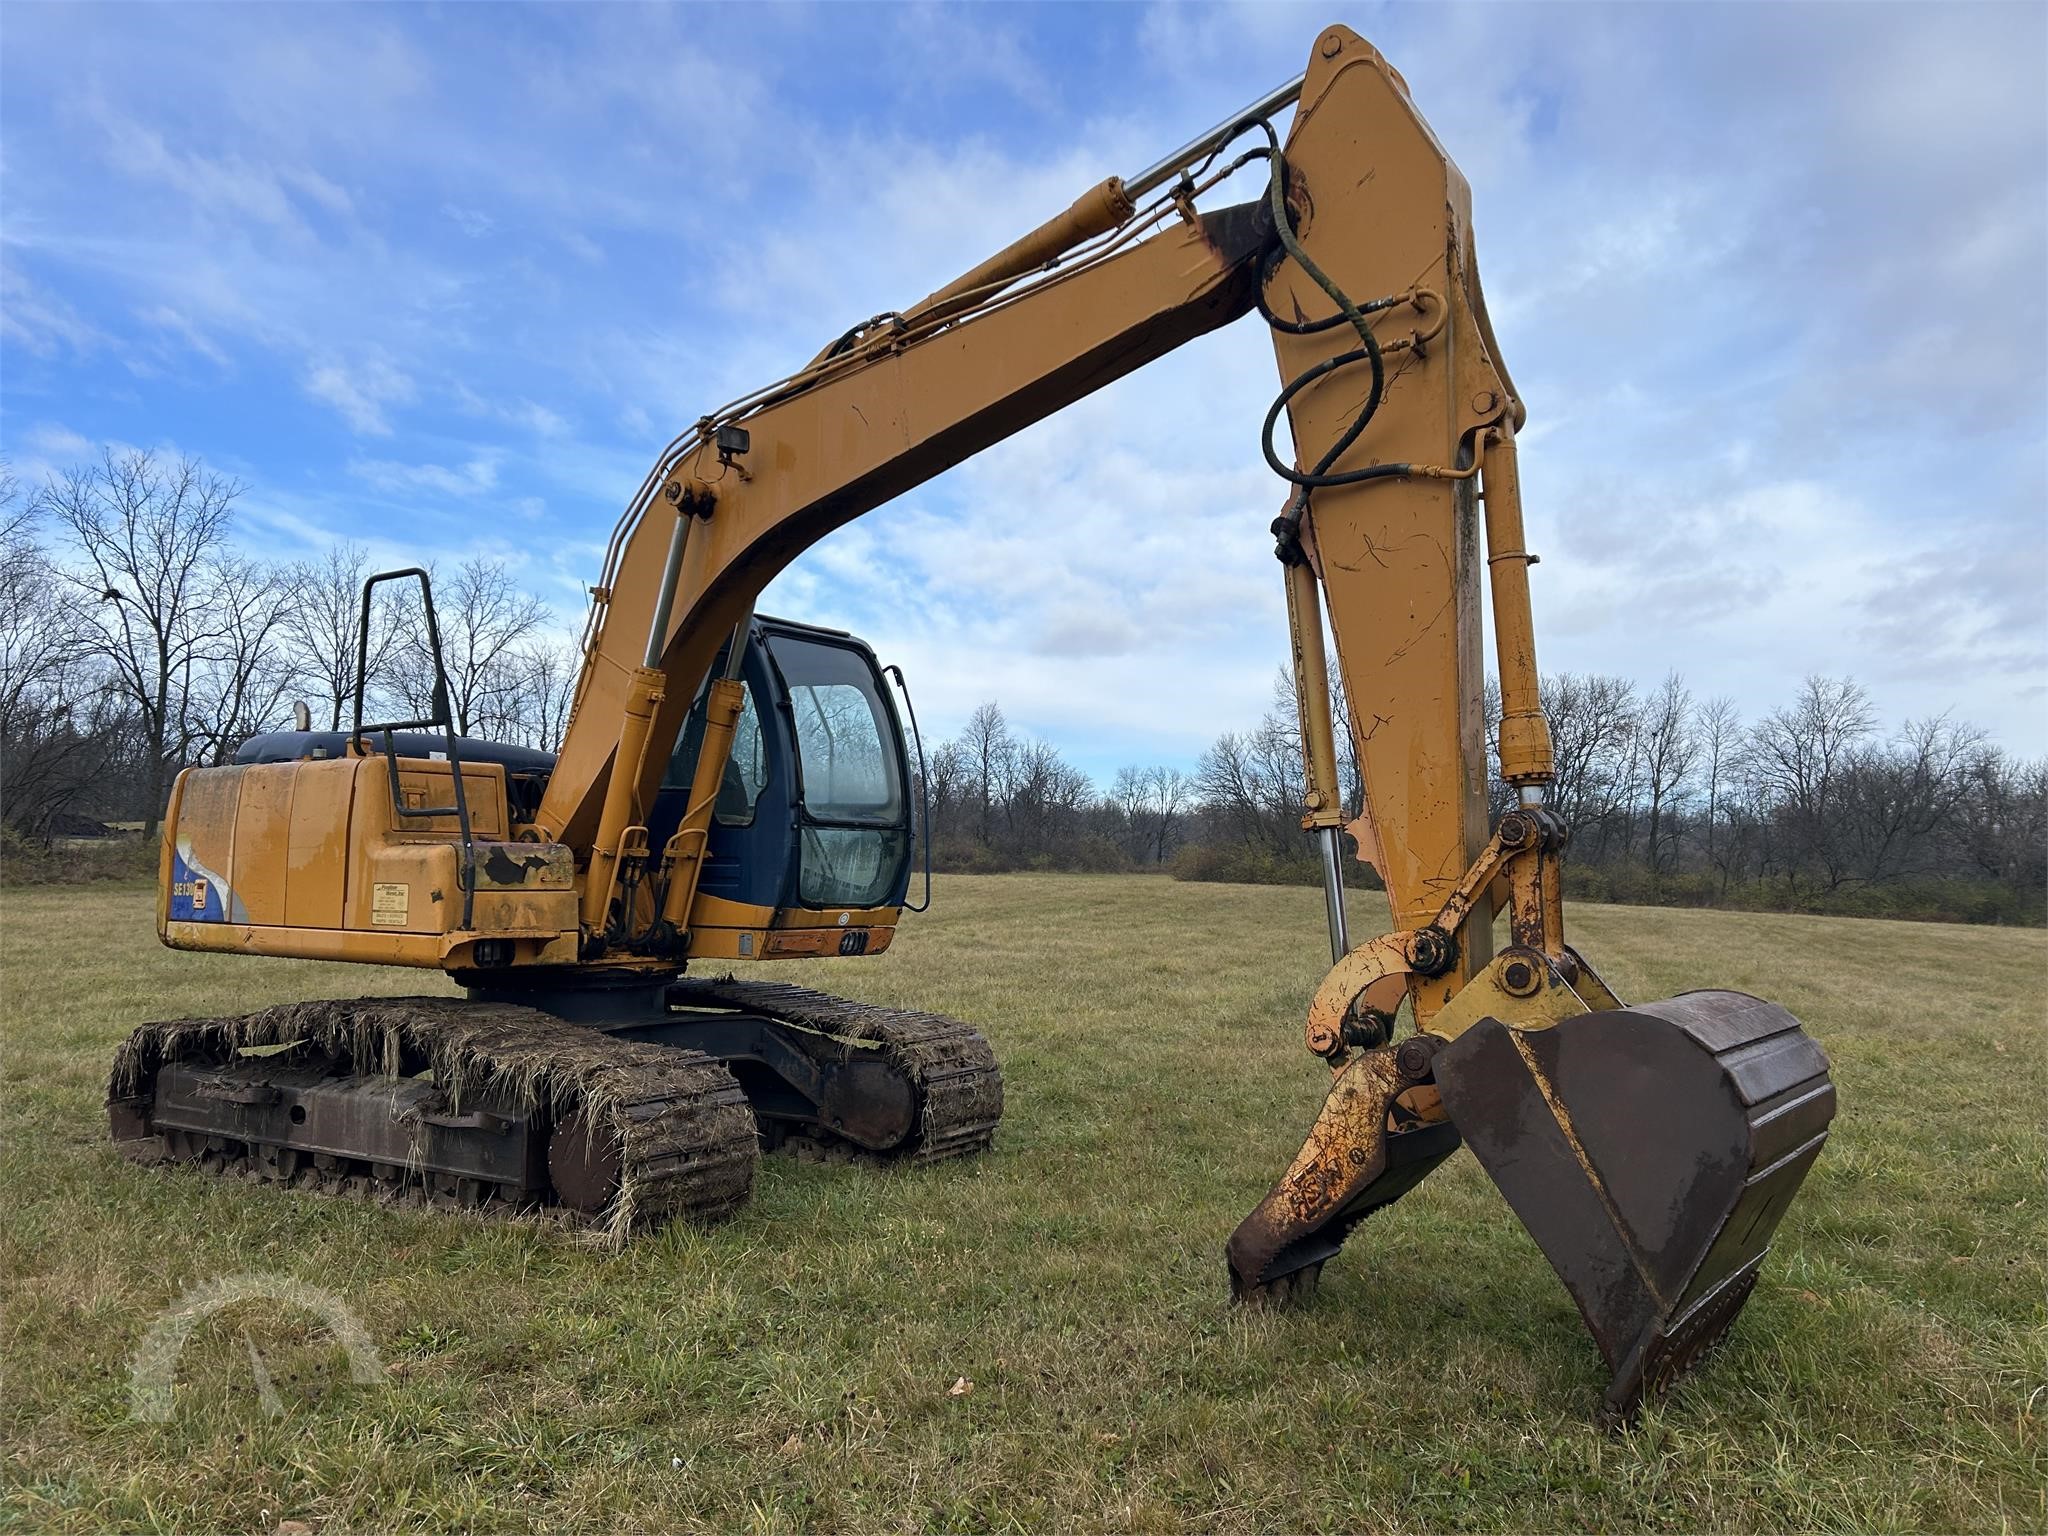 MULTIPOWER Construction Equipment Auction Results